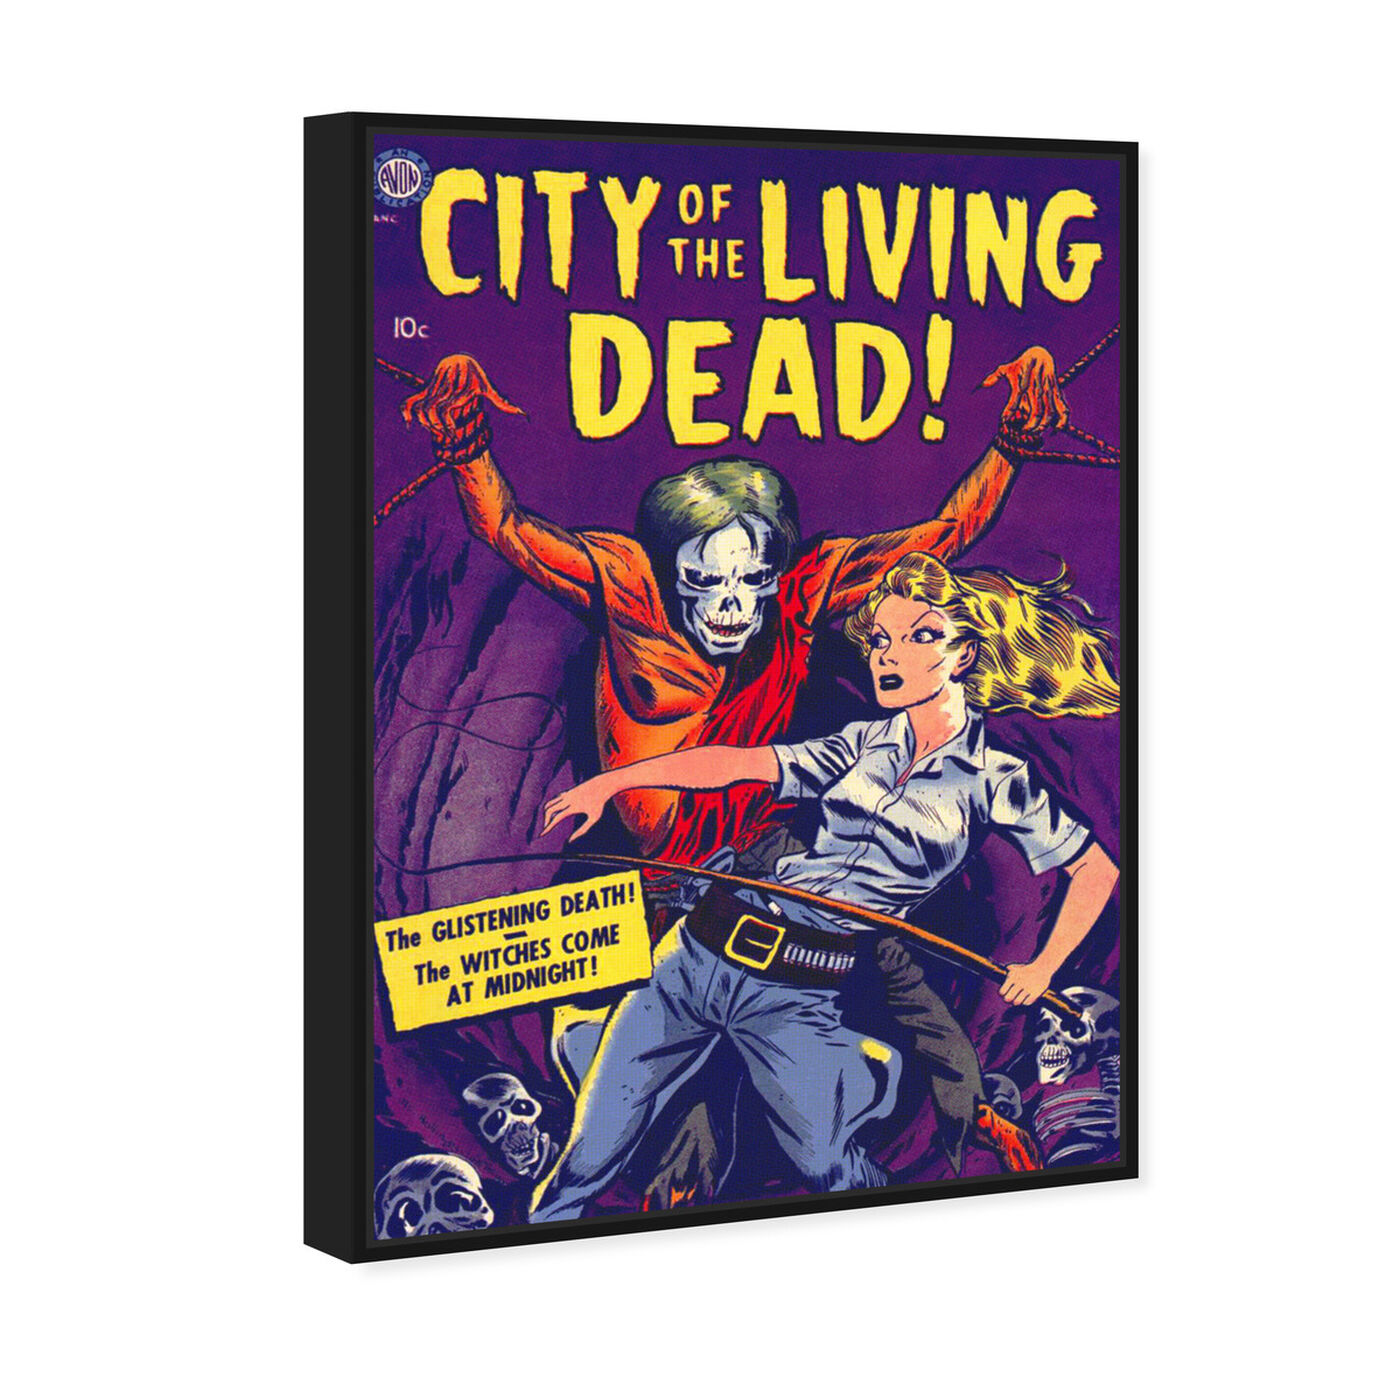 Angled view of City Of The Living Dead featuring advertising and comics art.